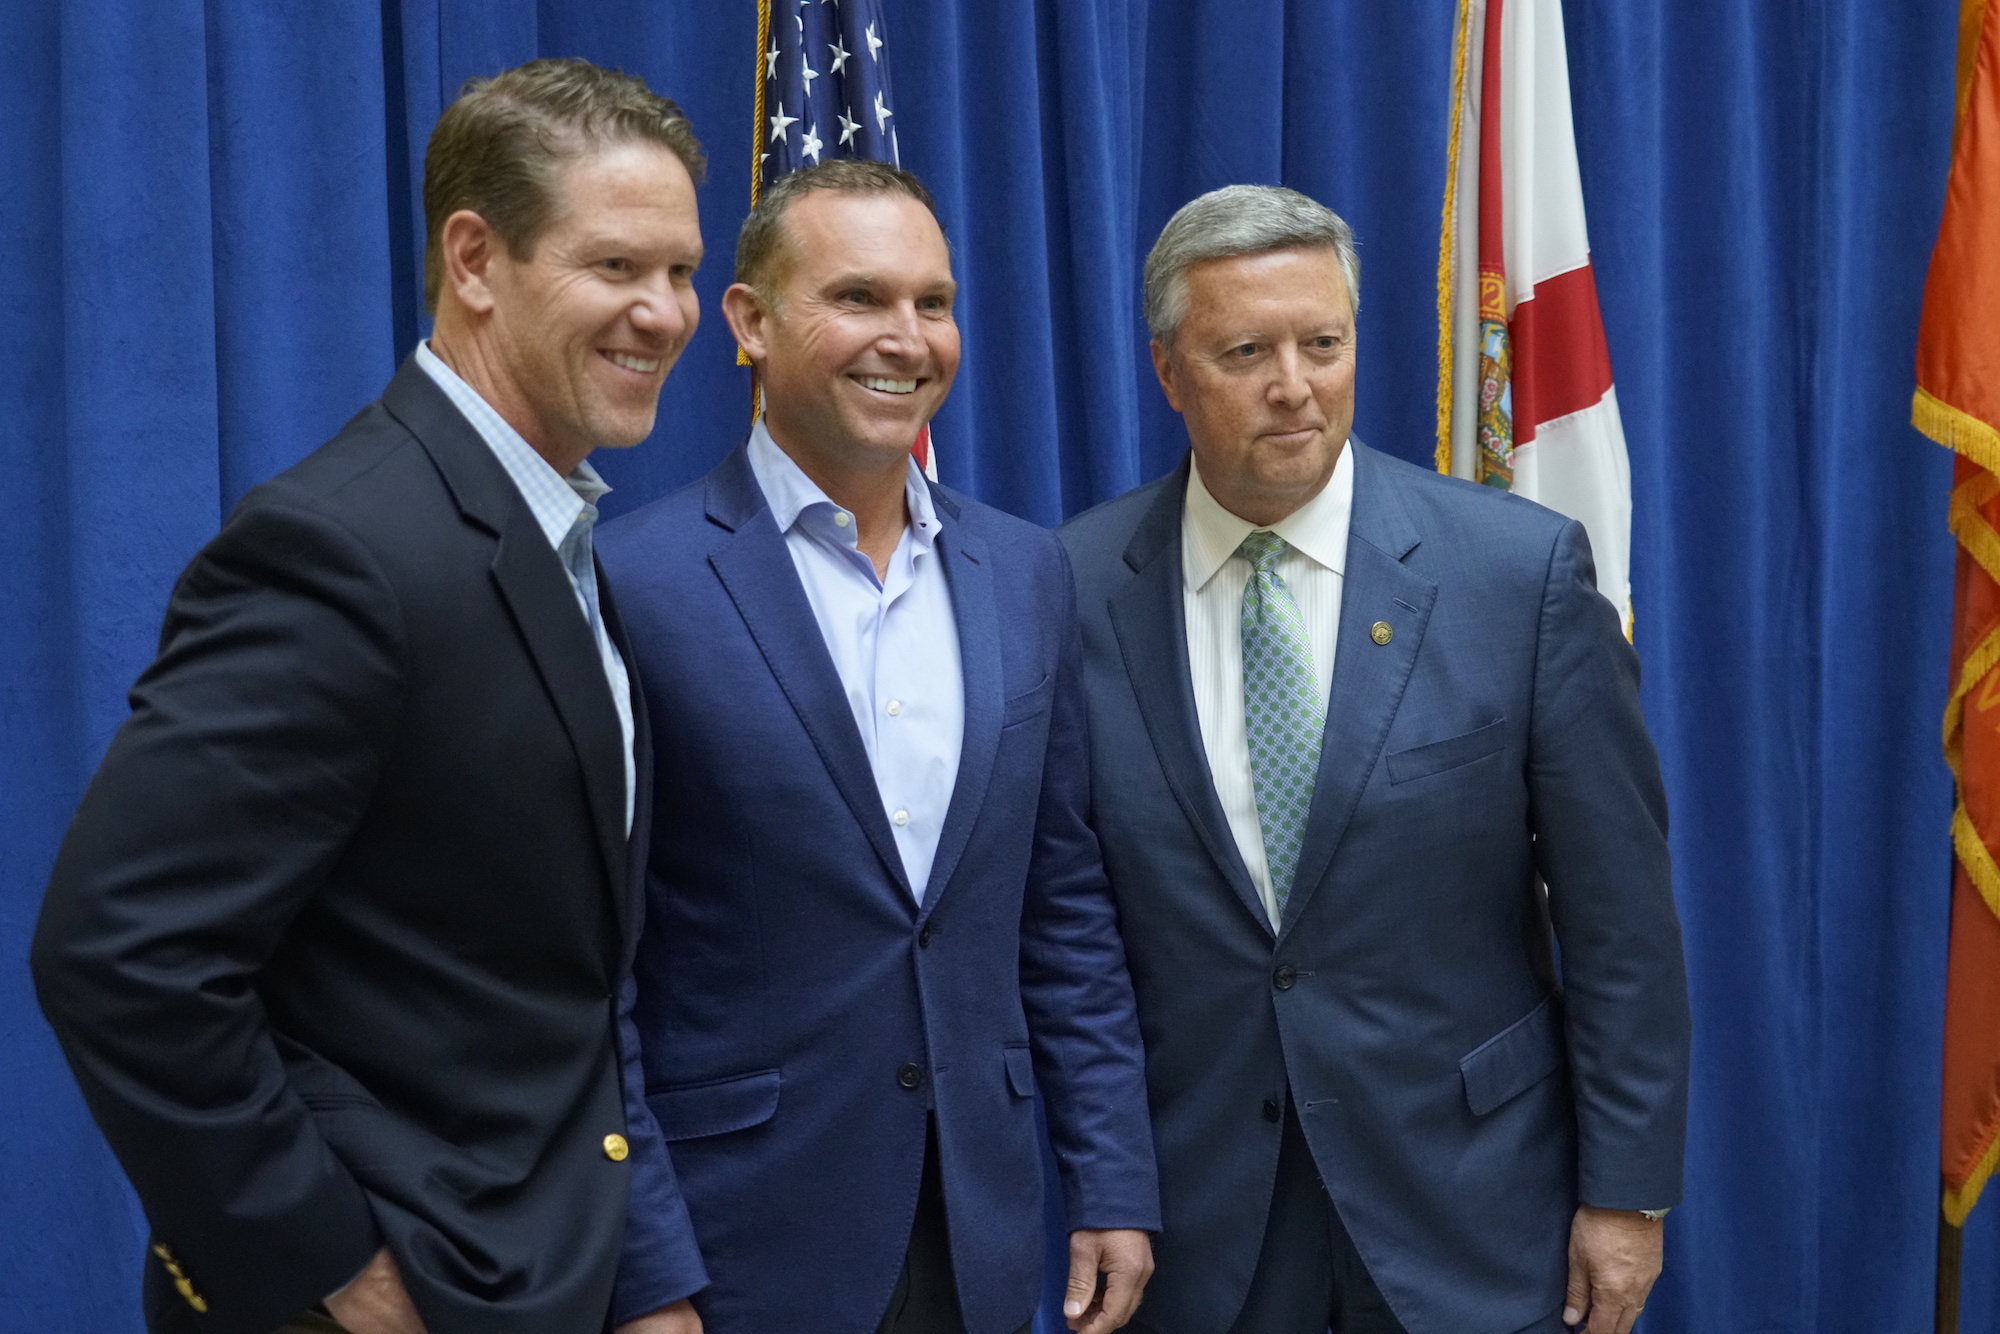 Mayor Lenny Curry and JU President Tim Cost, and another man are all dressed in blue in front of a podium, in front of a series of flags.